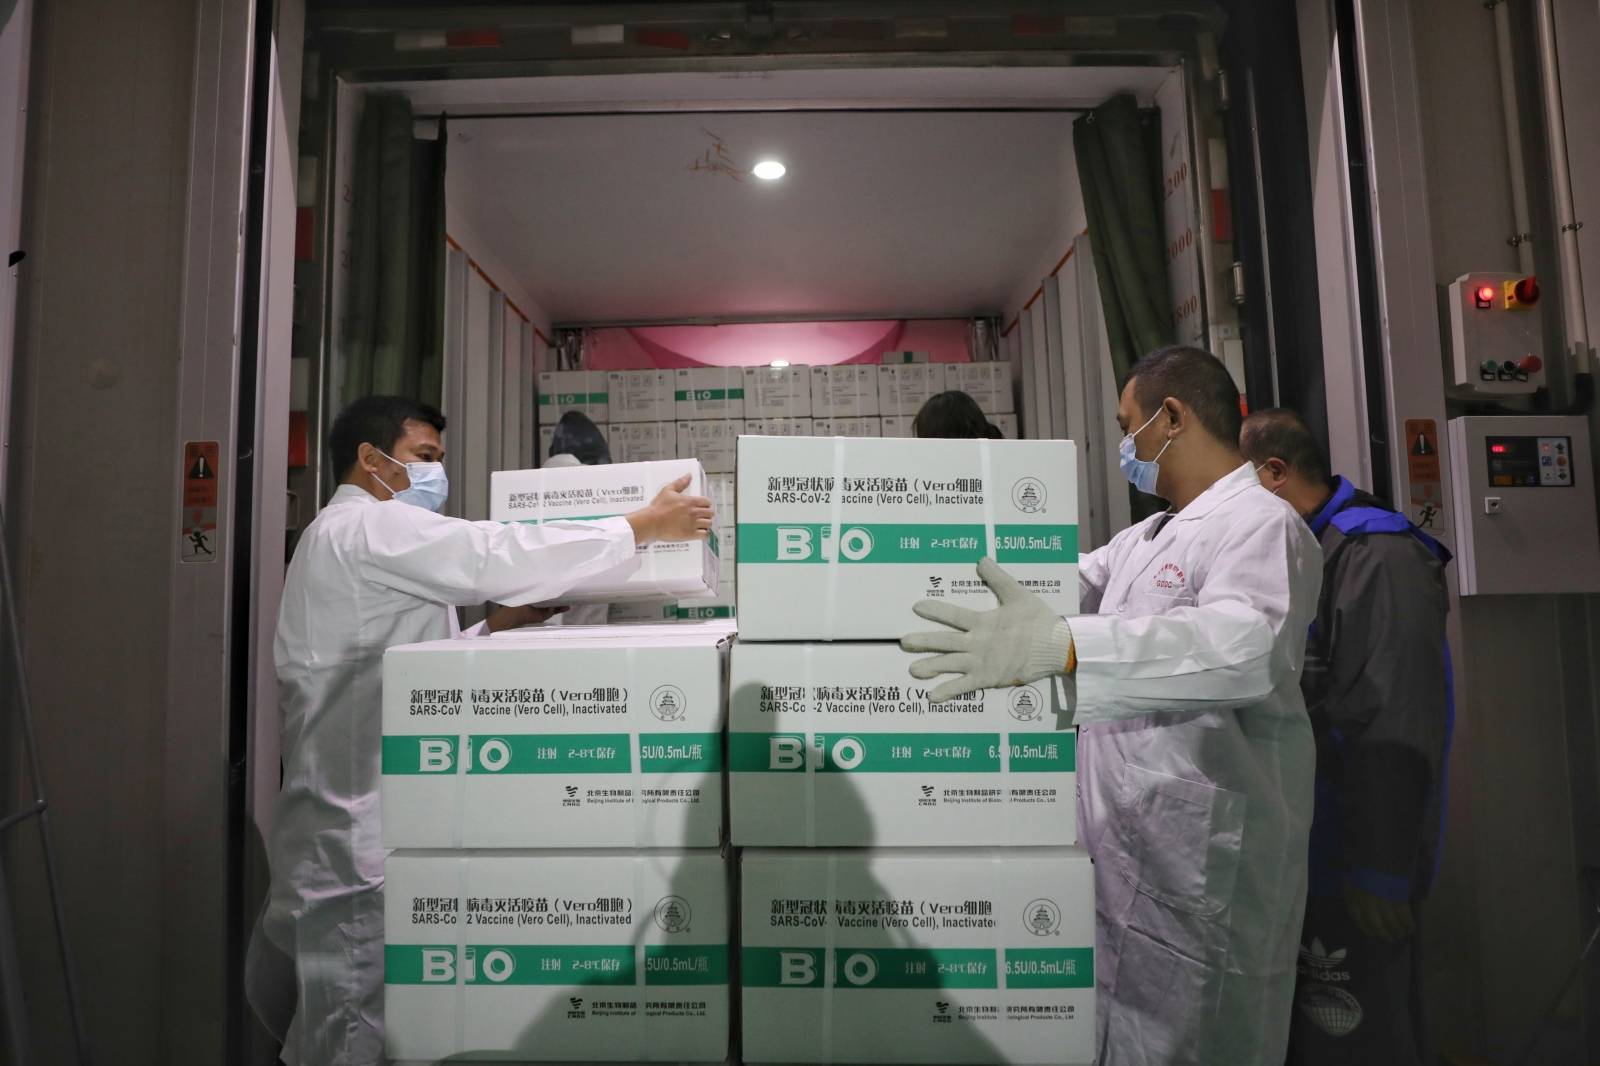 Workers transport boxes of COVID-19 vaccines from a truck to a cold storage facility in Guangzhou